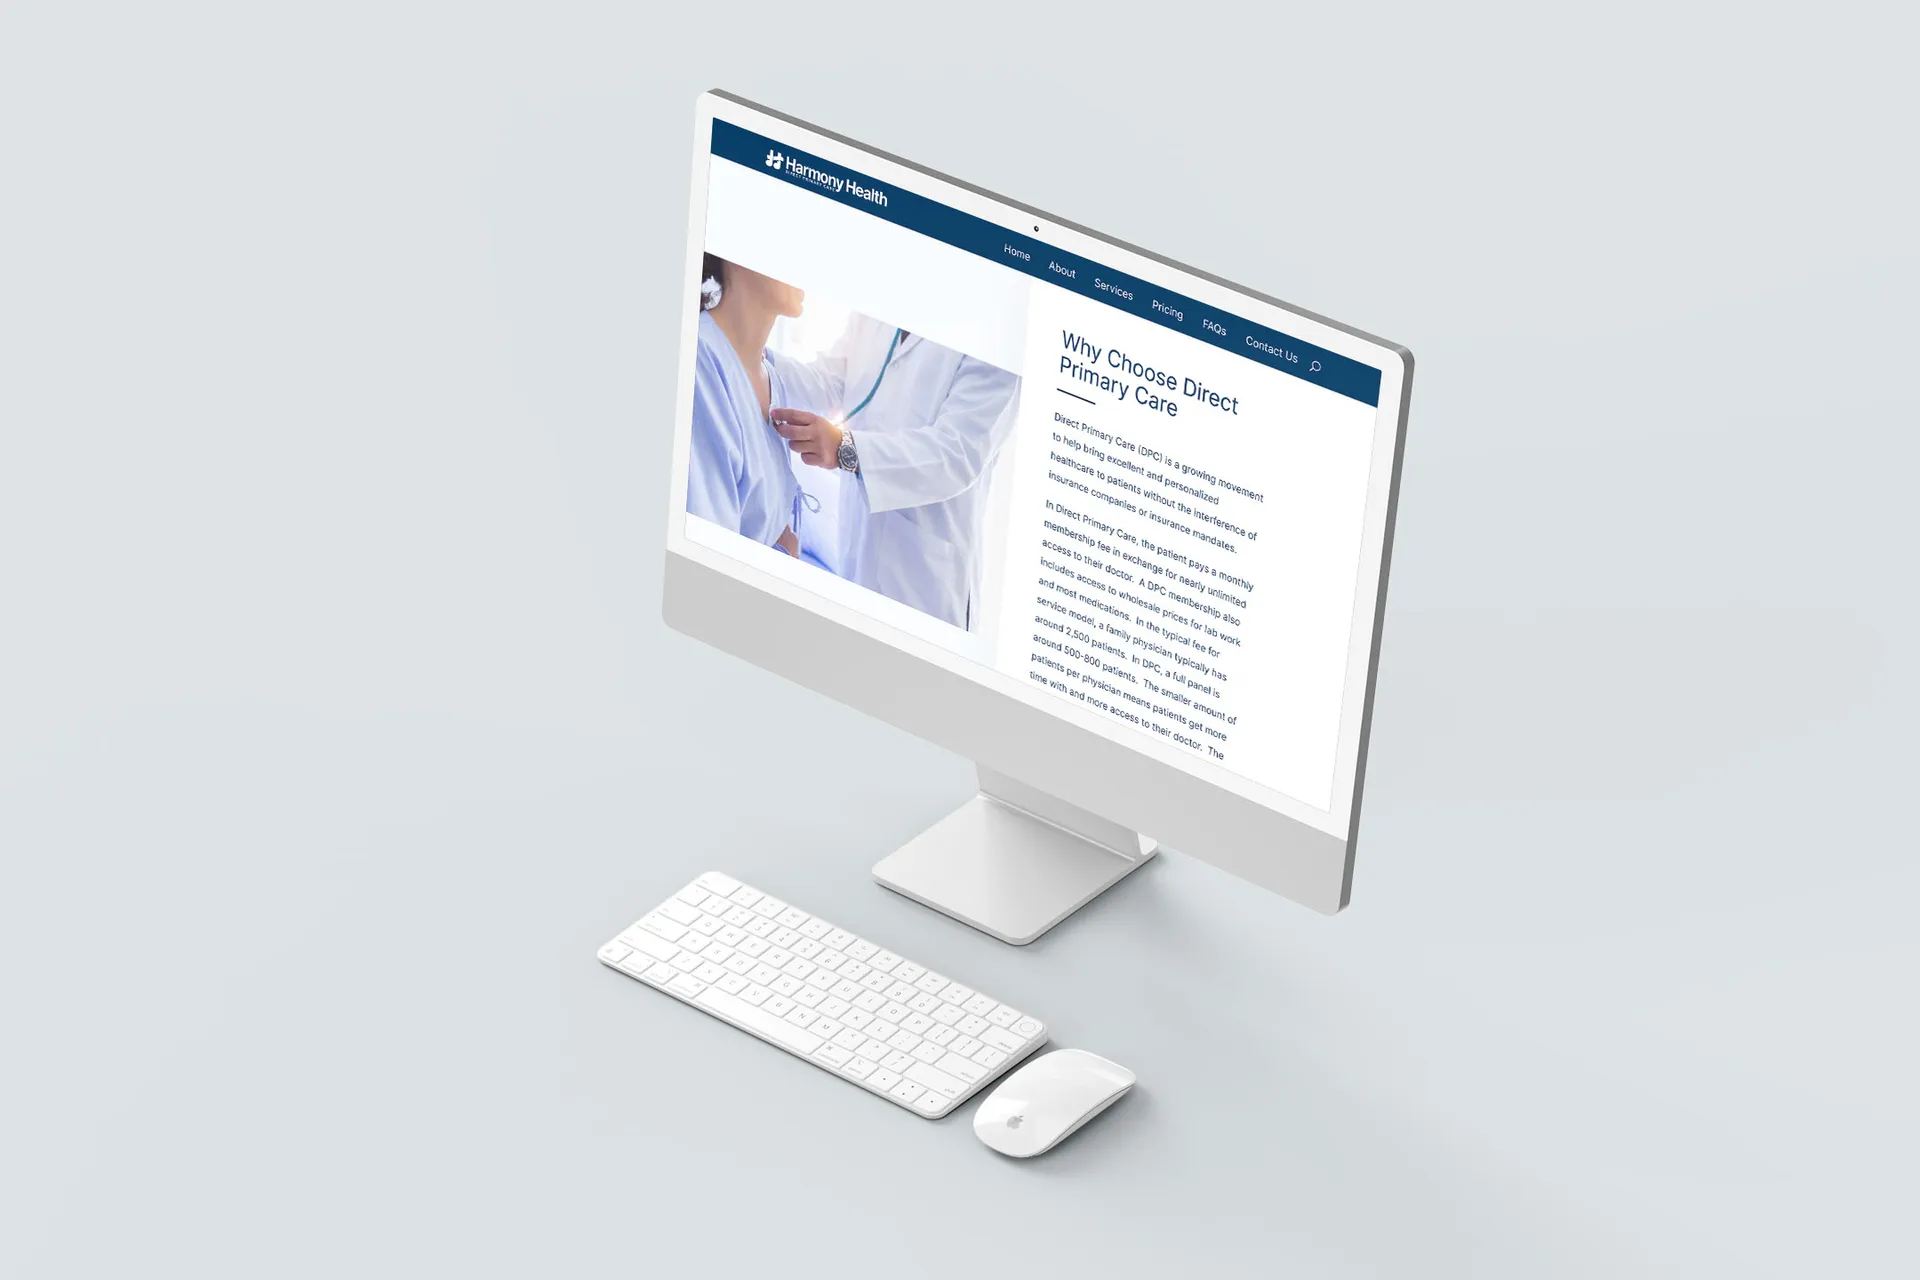 An iMac with the Harmony Health website displayed.